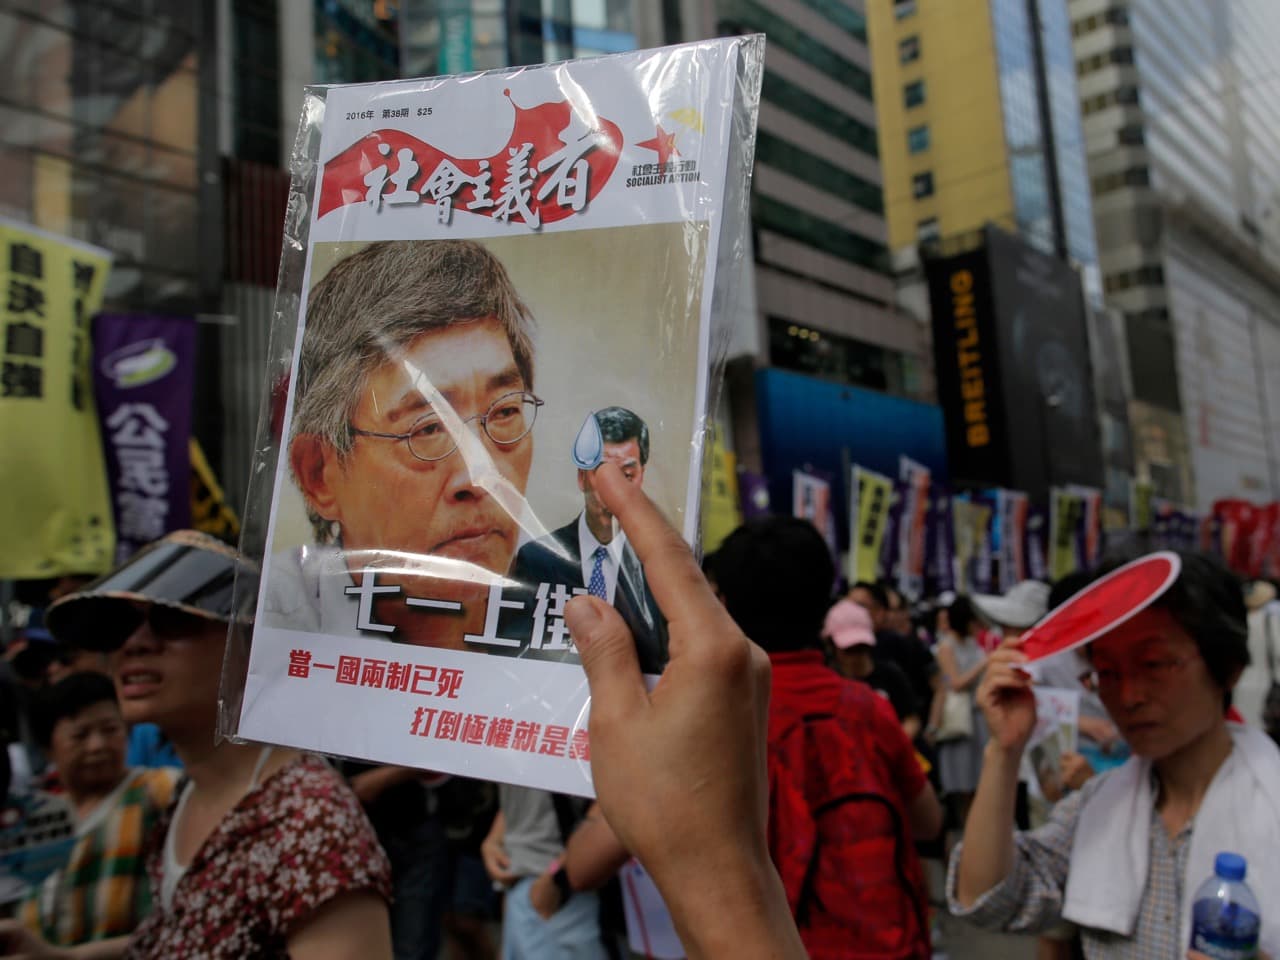 A protester raises a booklet with a picture of bookseller Lam Wing-kee on the cover during an annual pro-democracy protest in Hong Kong, 1 July 2016, AP Photo/Vincent Yu